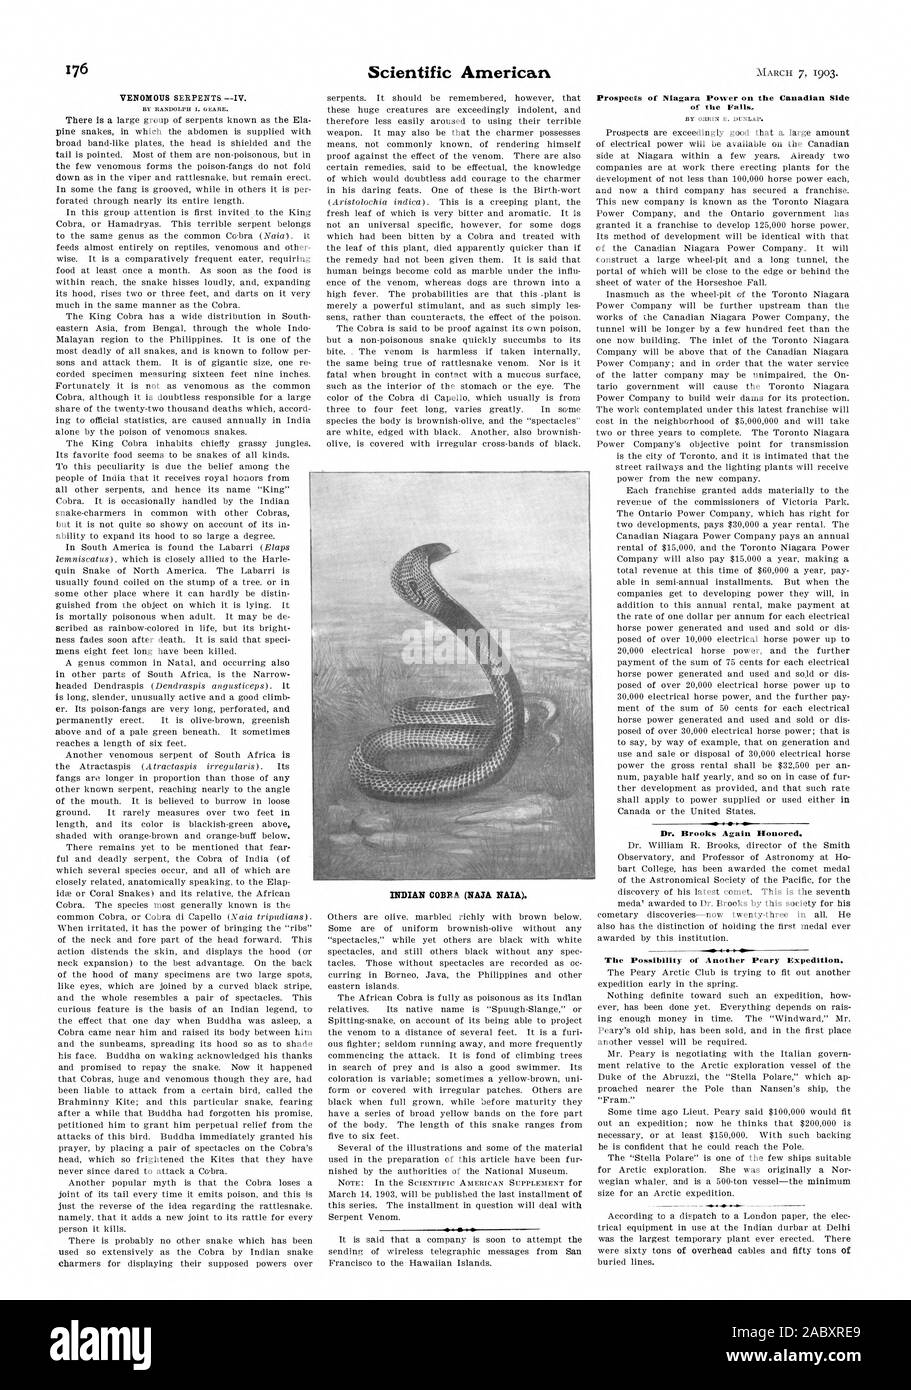 INDIAN COBRA (NASA NAIA). Prospects of Niagara Power on the Canadian Side of the Falls. Dr. Brooks Again Honored. The Possibility of Another Peary Expedition., scientific american, 1903-03-07 Stock Photo